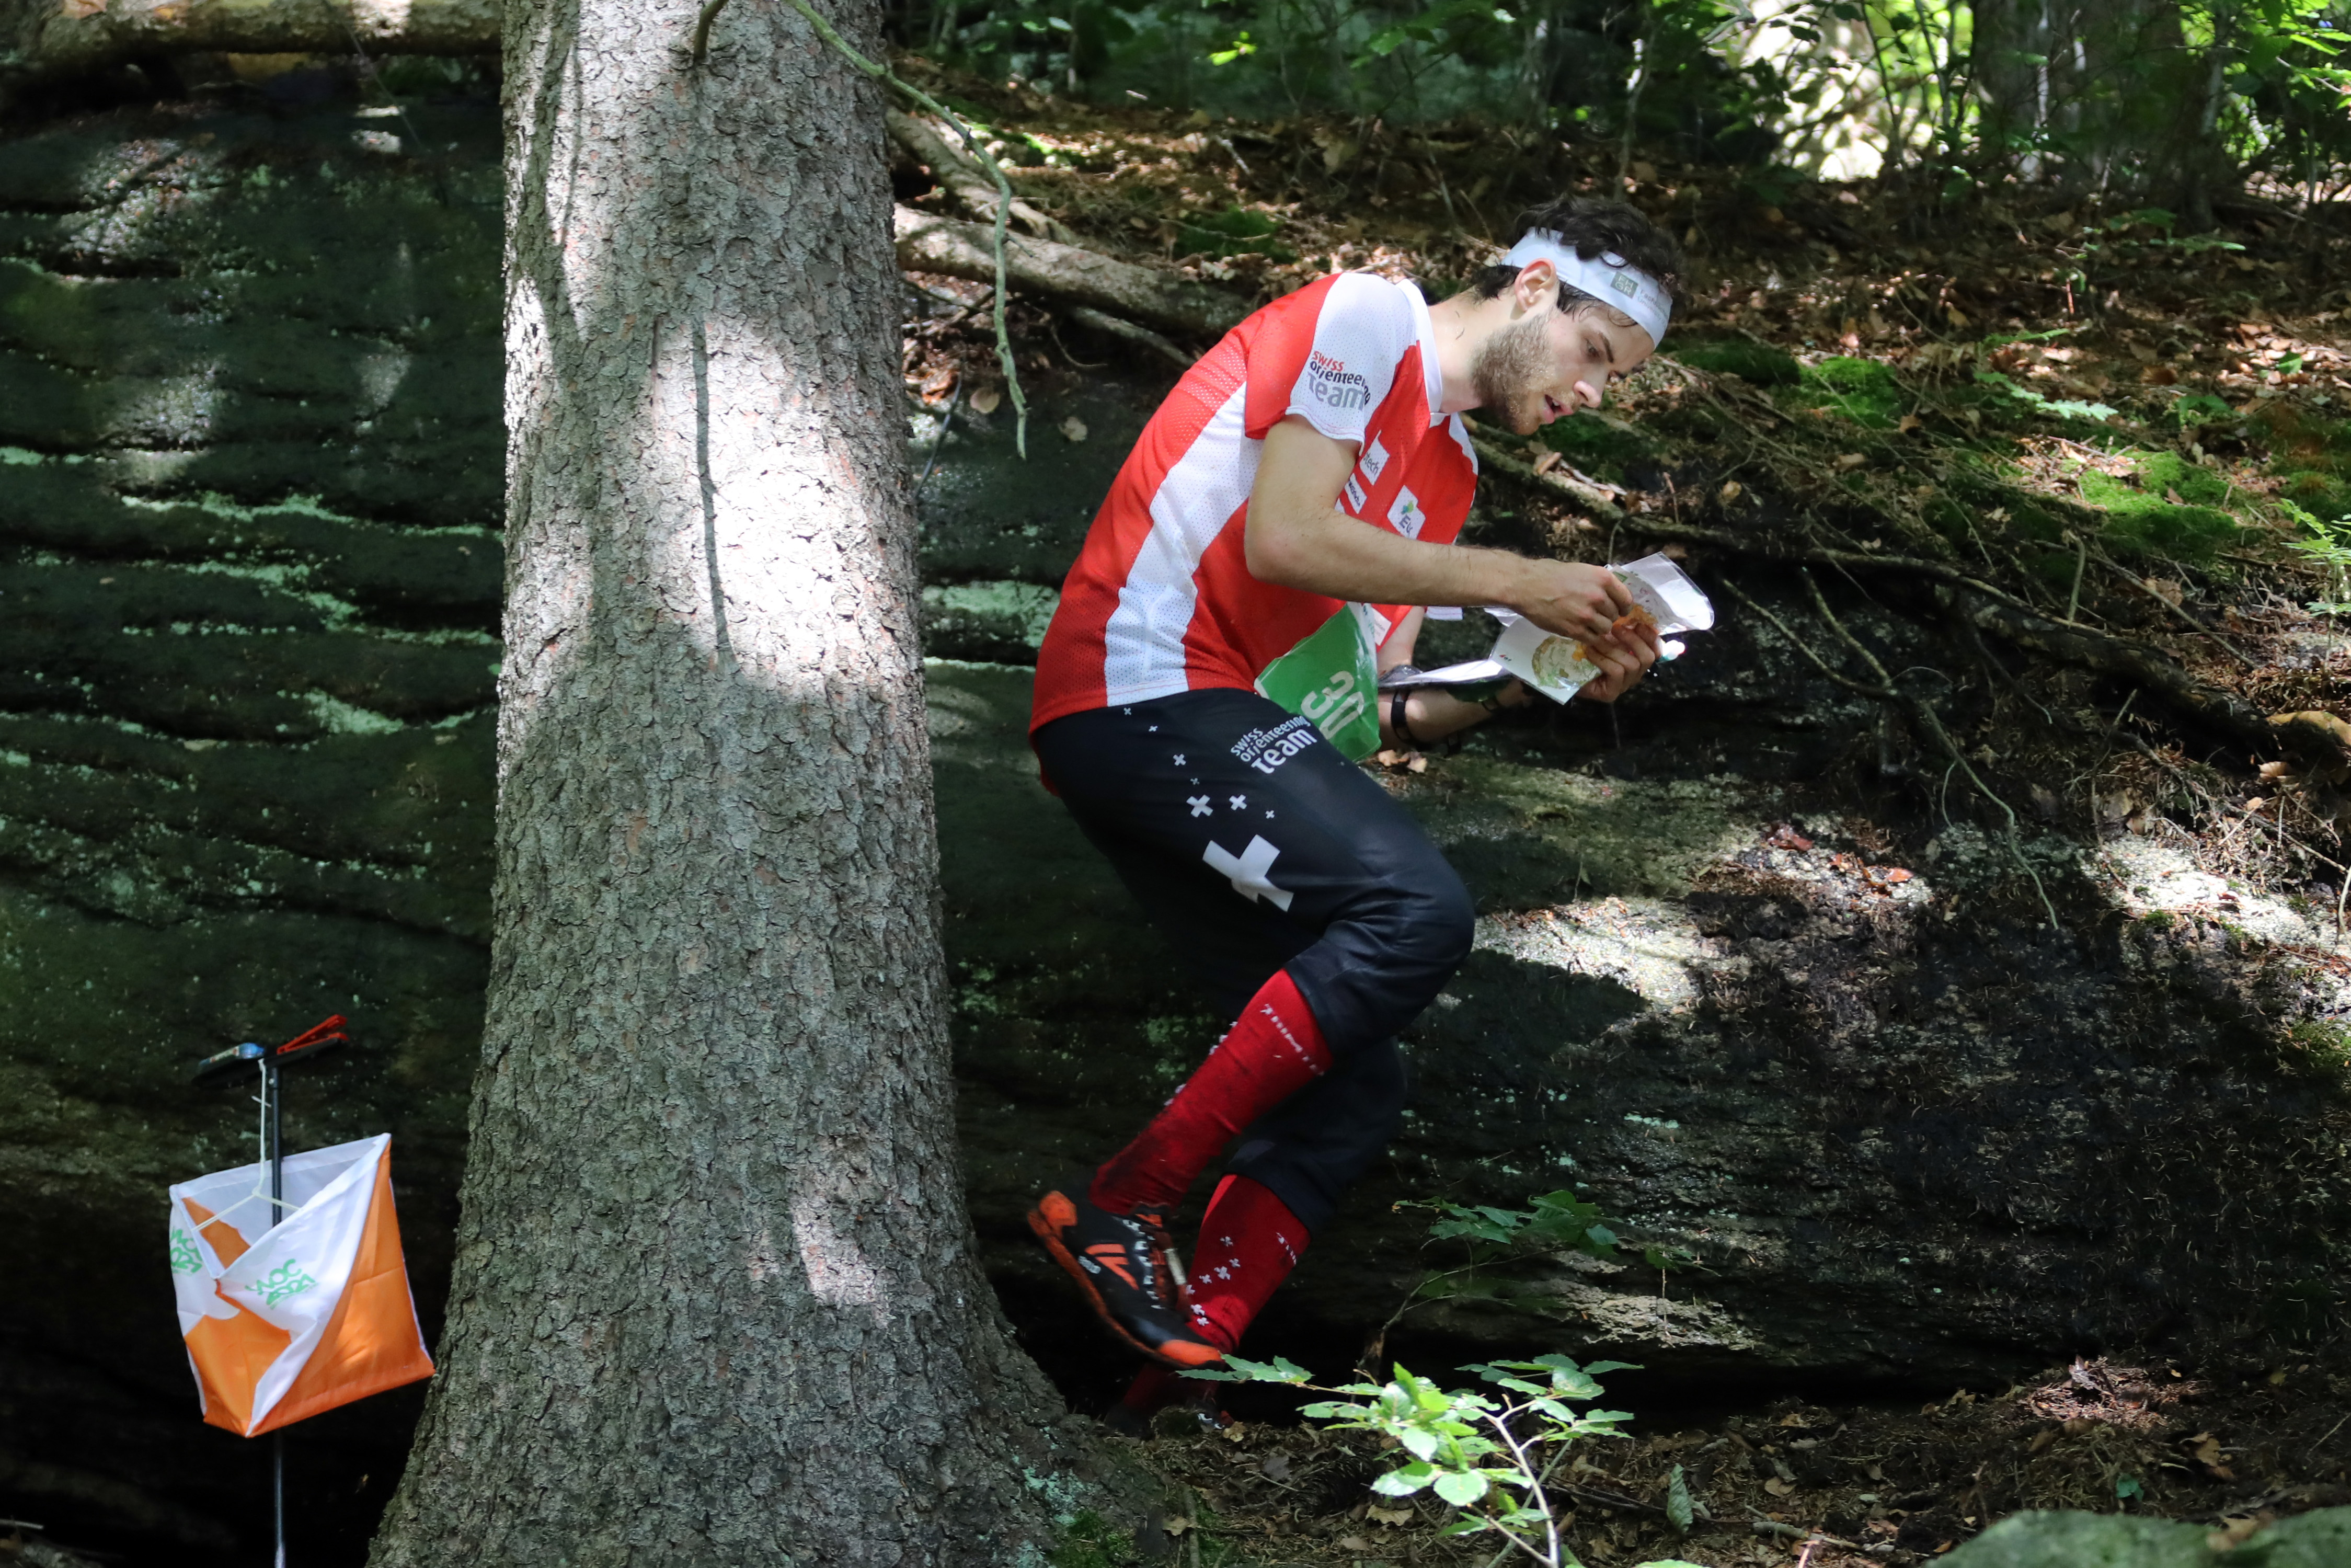 SMRZOVKA/CZE, 06.07.2021 - Noah Zbinden (SUI), captured during the Middle Distance Qualifications at the Nokian Tyres World Orienteering Championships WOC 2021 in Doksy / Czech Republic.   swiss-image.ch + swiss orienteering / Photo Remy Steinegger